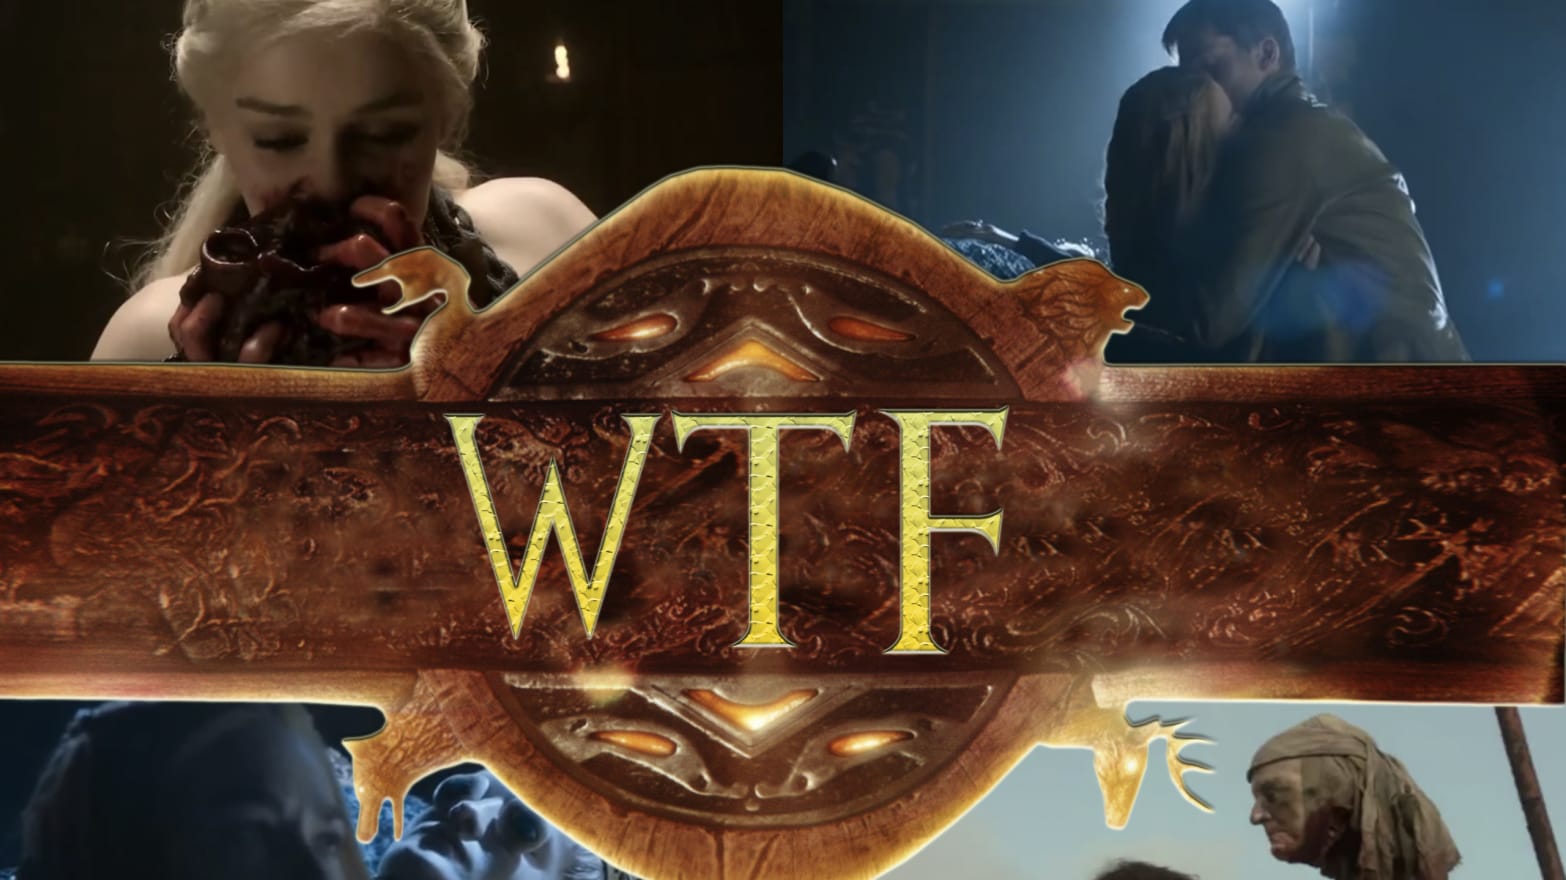 Game Of Thrones 8 Most Wtf Scenes Twincest Rape Shadow Baby